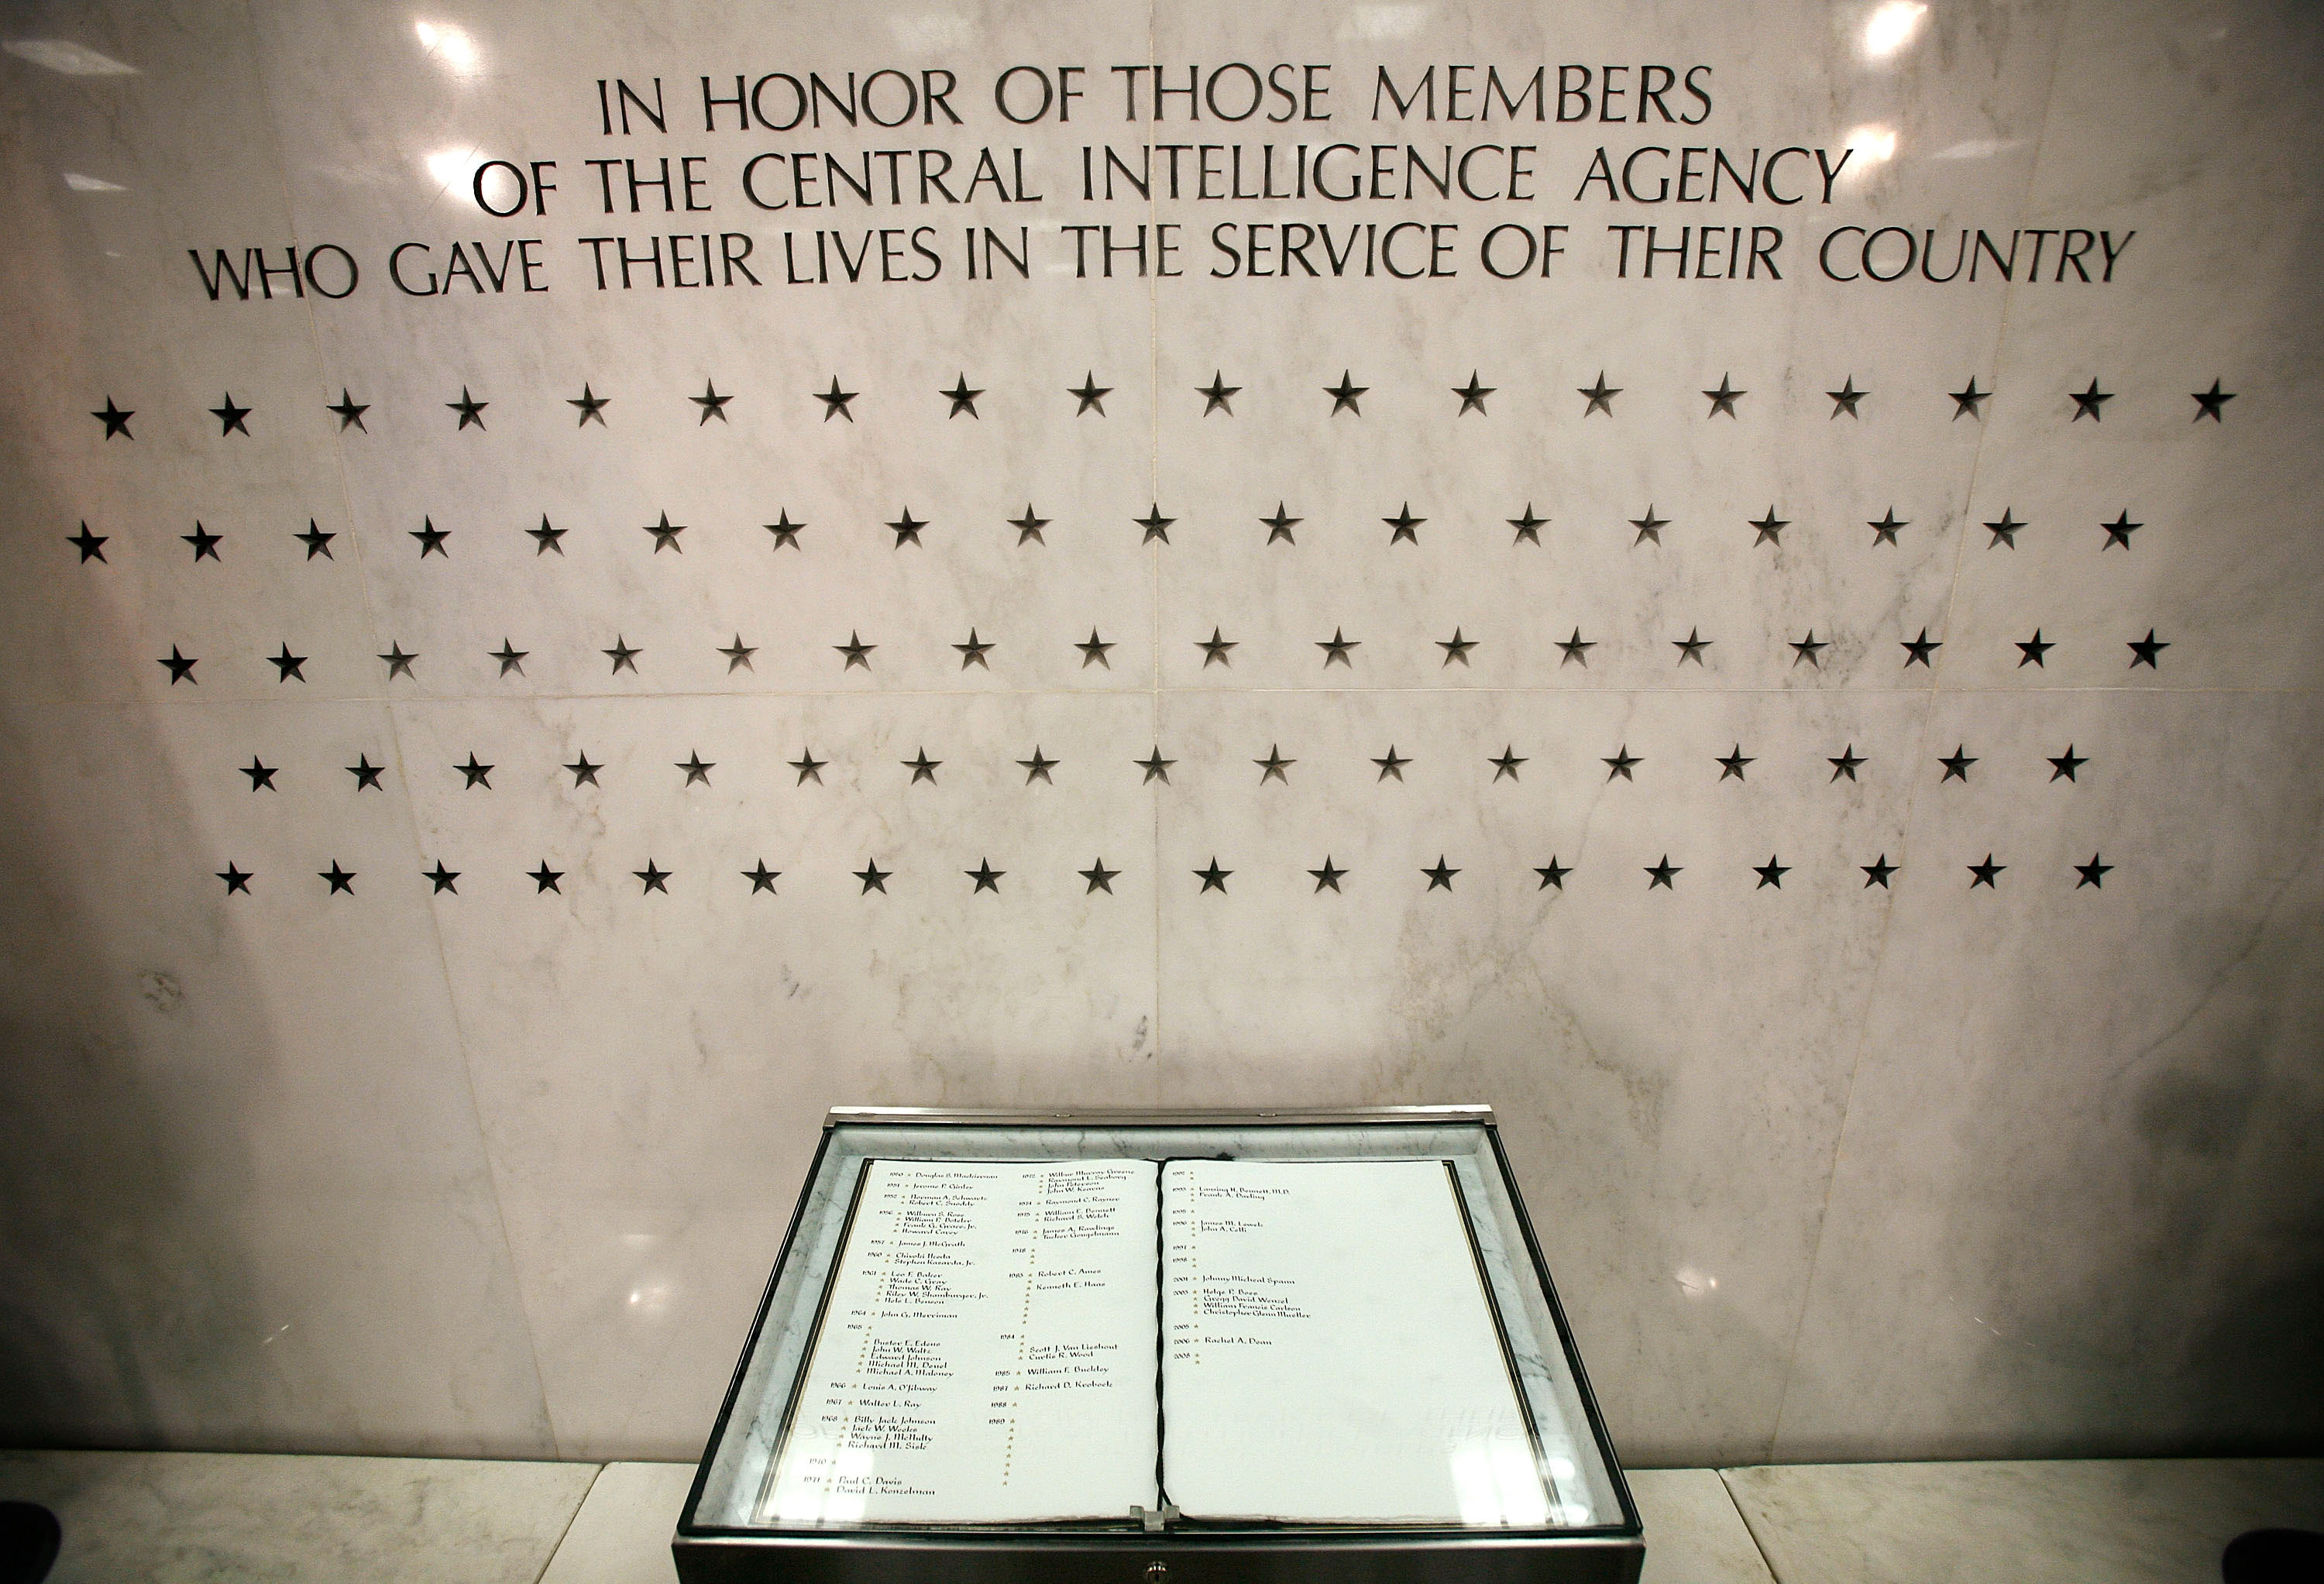 MCLEAN, VA - FEBRUARY 19: The Memorial Wall and the "Book of Honor" are seen in the lobby of the Original Headquarters Building at the Central Intelligence Agency headquarters February 19, 2009 in McLean, Virginia. The stars on the wall represent the number of CIA officers who have lost their lives for the country. (Photo by Alex Wong/Getty Images)